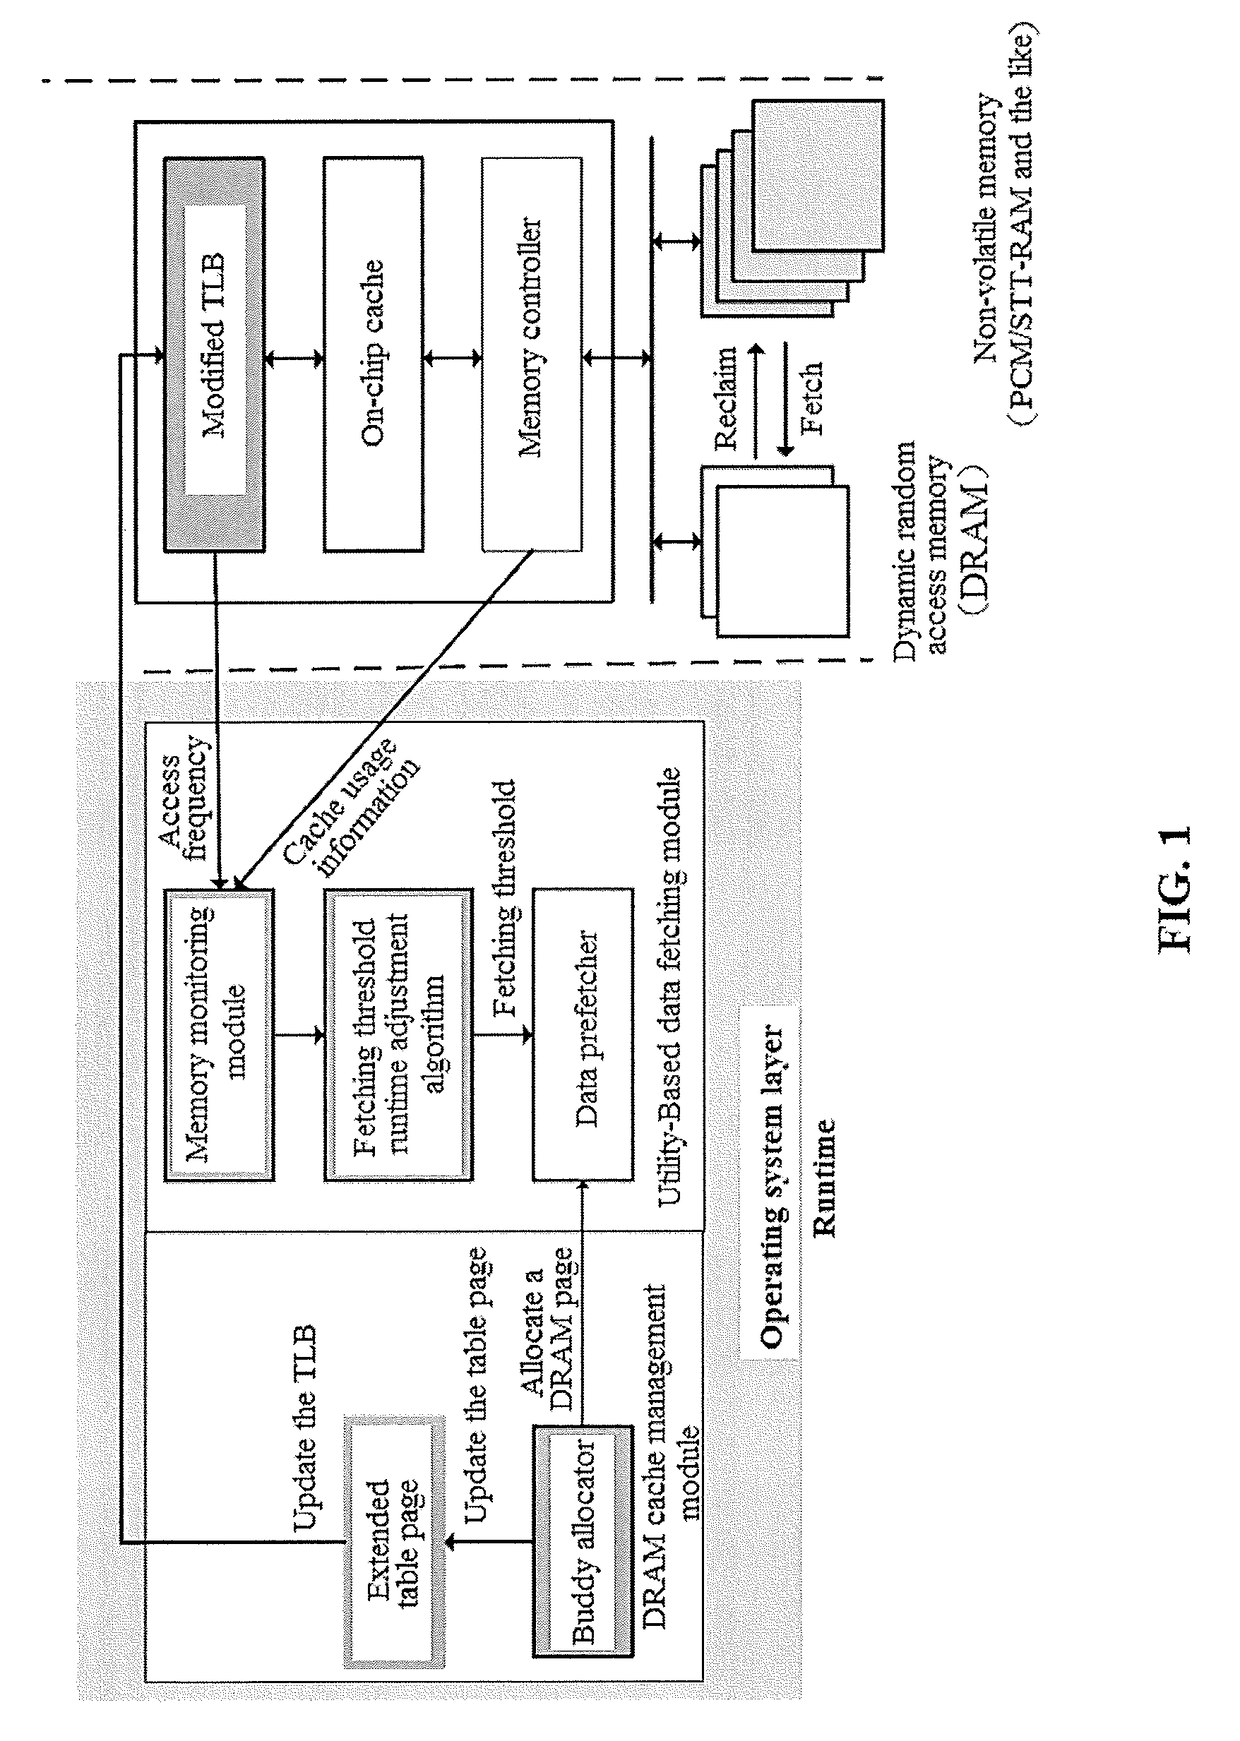 Dram/nvm hierarchical heterogeneous memory access method and system with software-hardware cooperative management